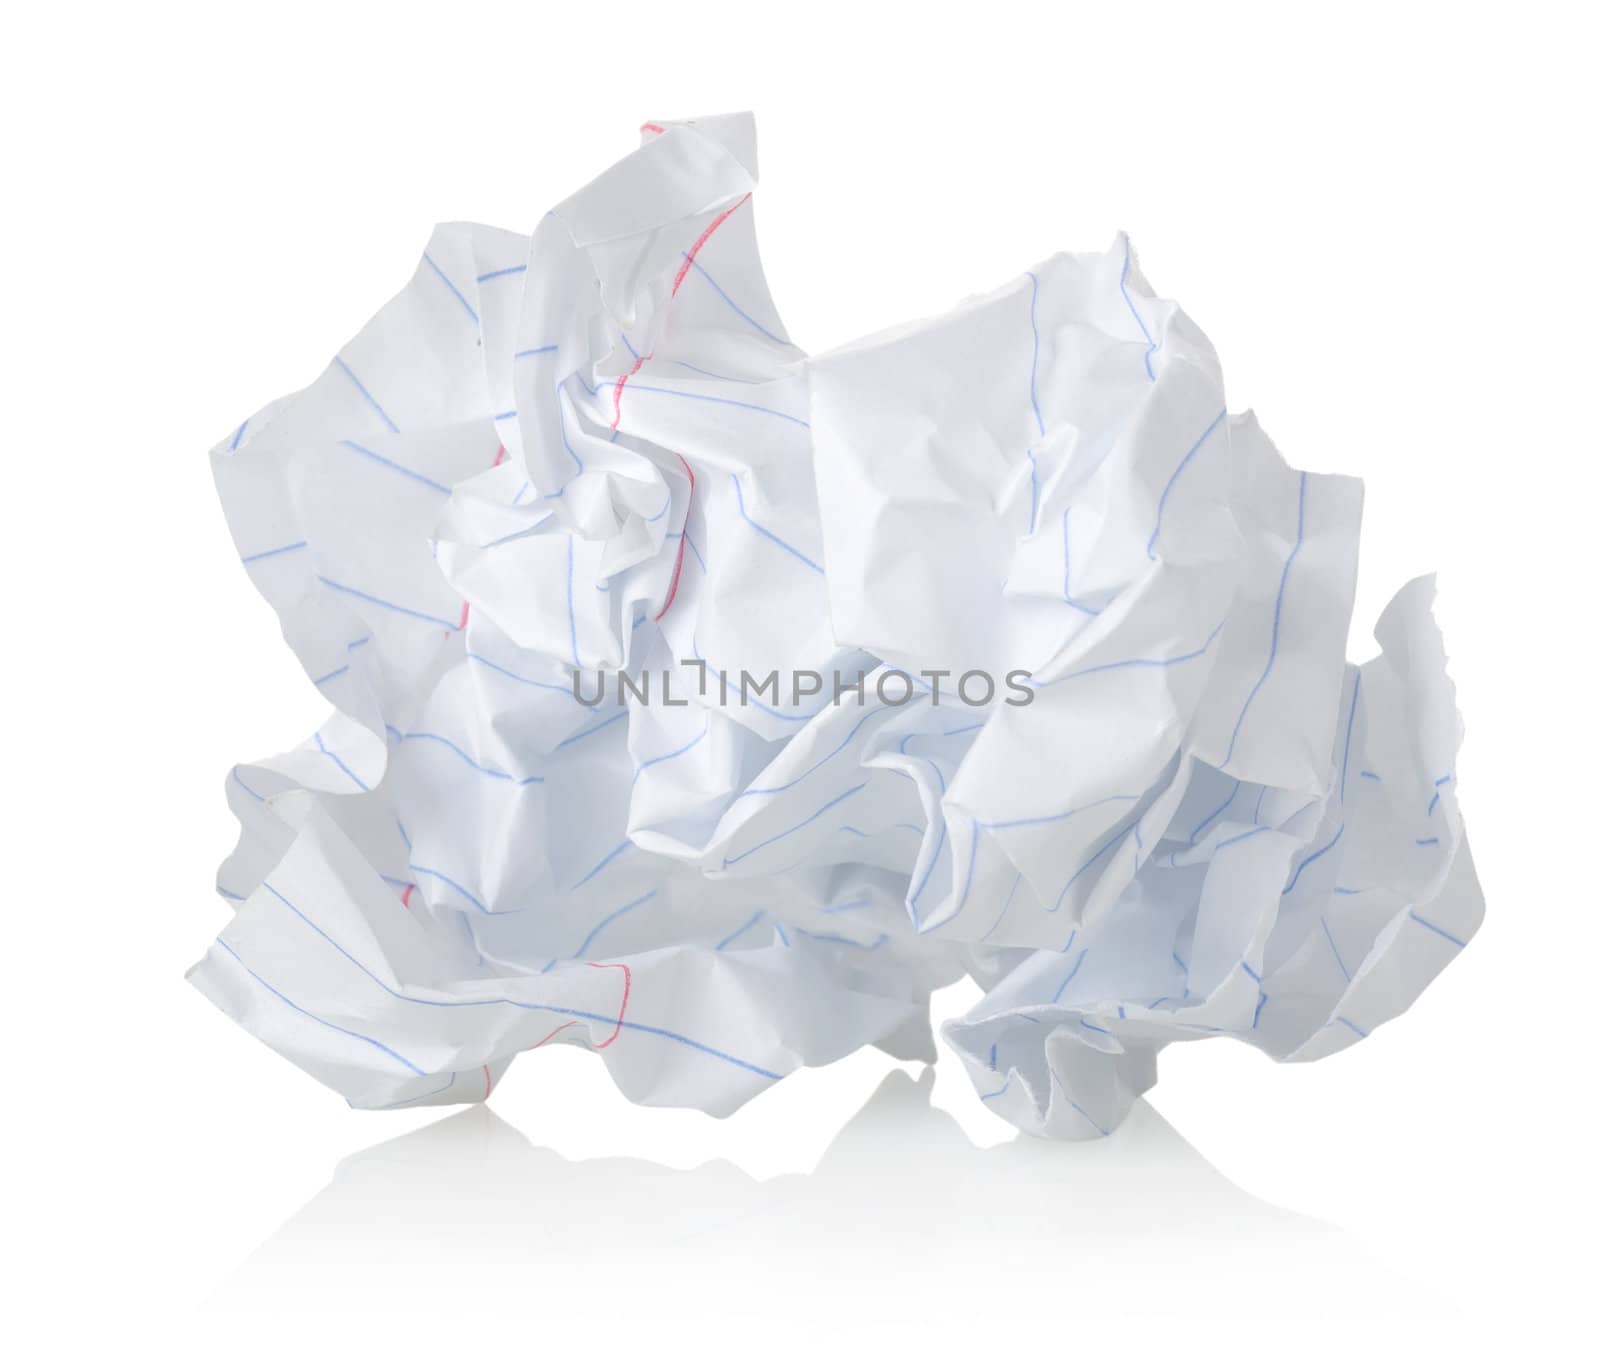 Crumpled paper by Givaga